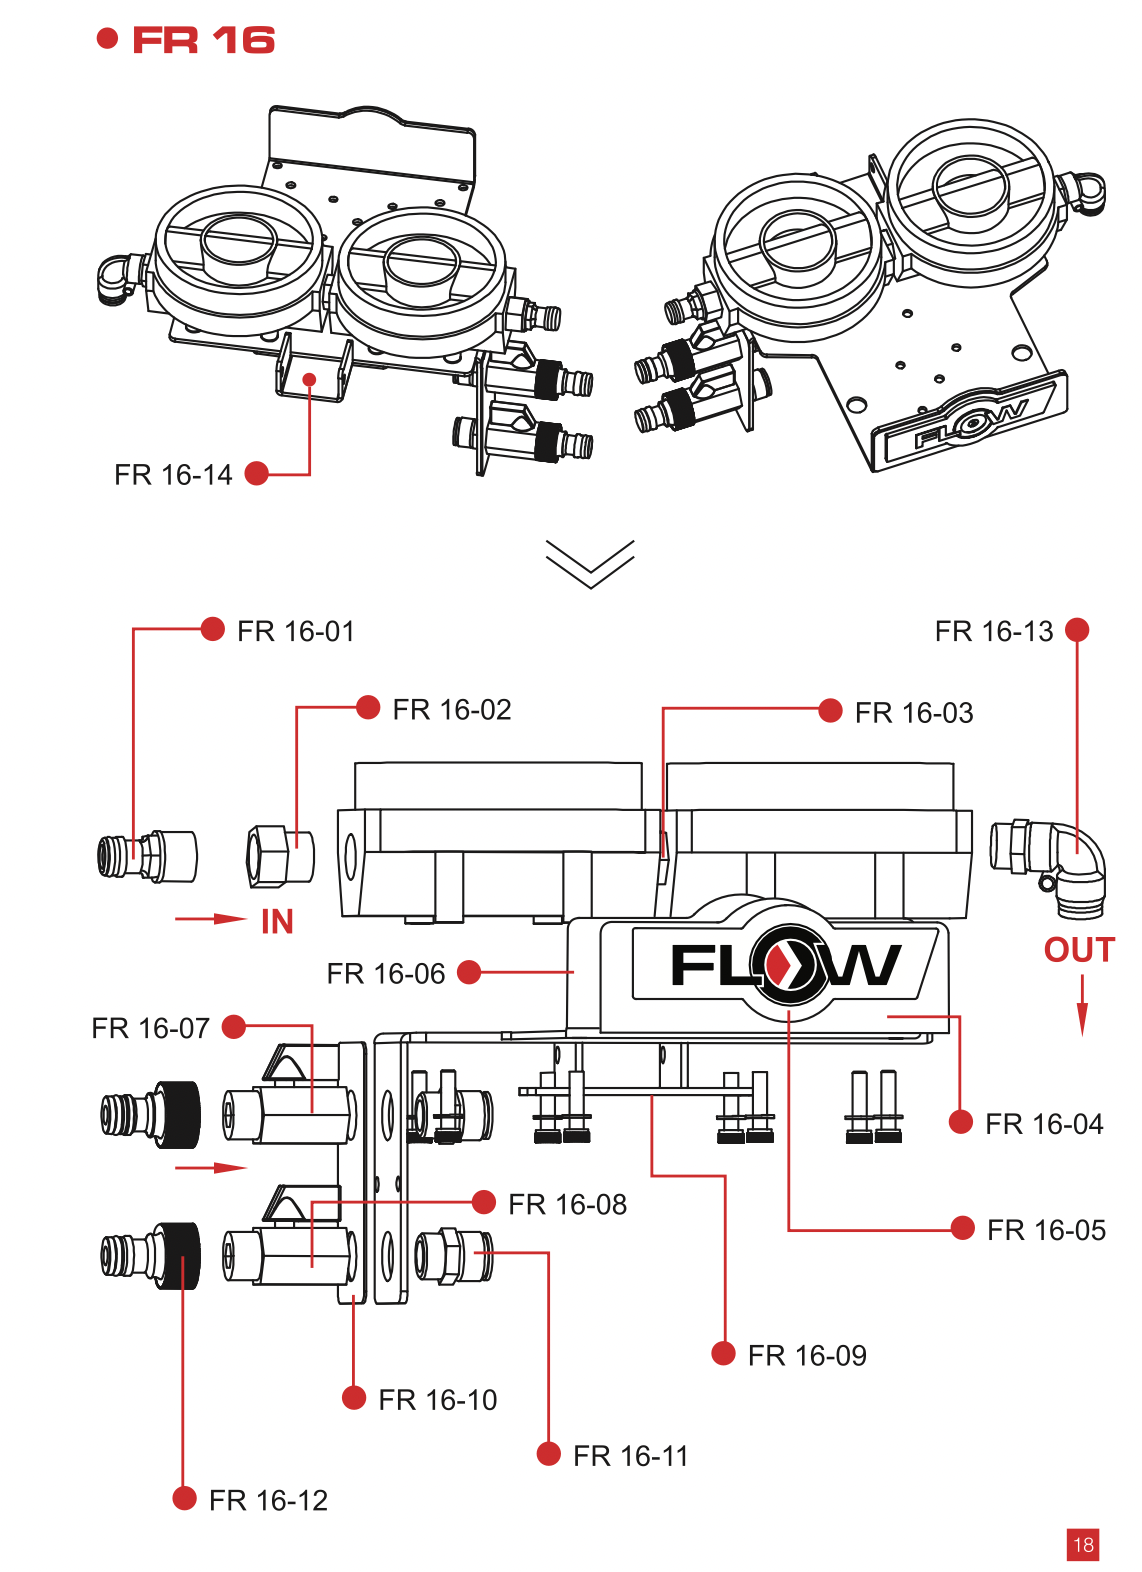 
                  
                    FR16-07 FLOW RED BLUE PURE WATER OUT VALVE
                  
                